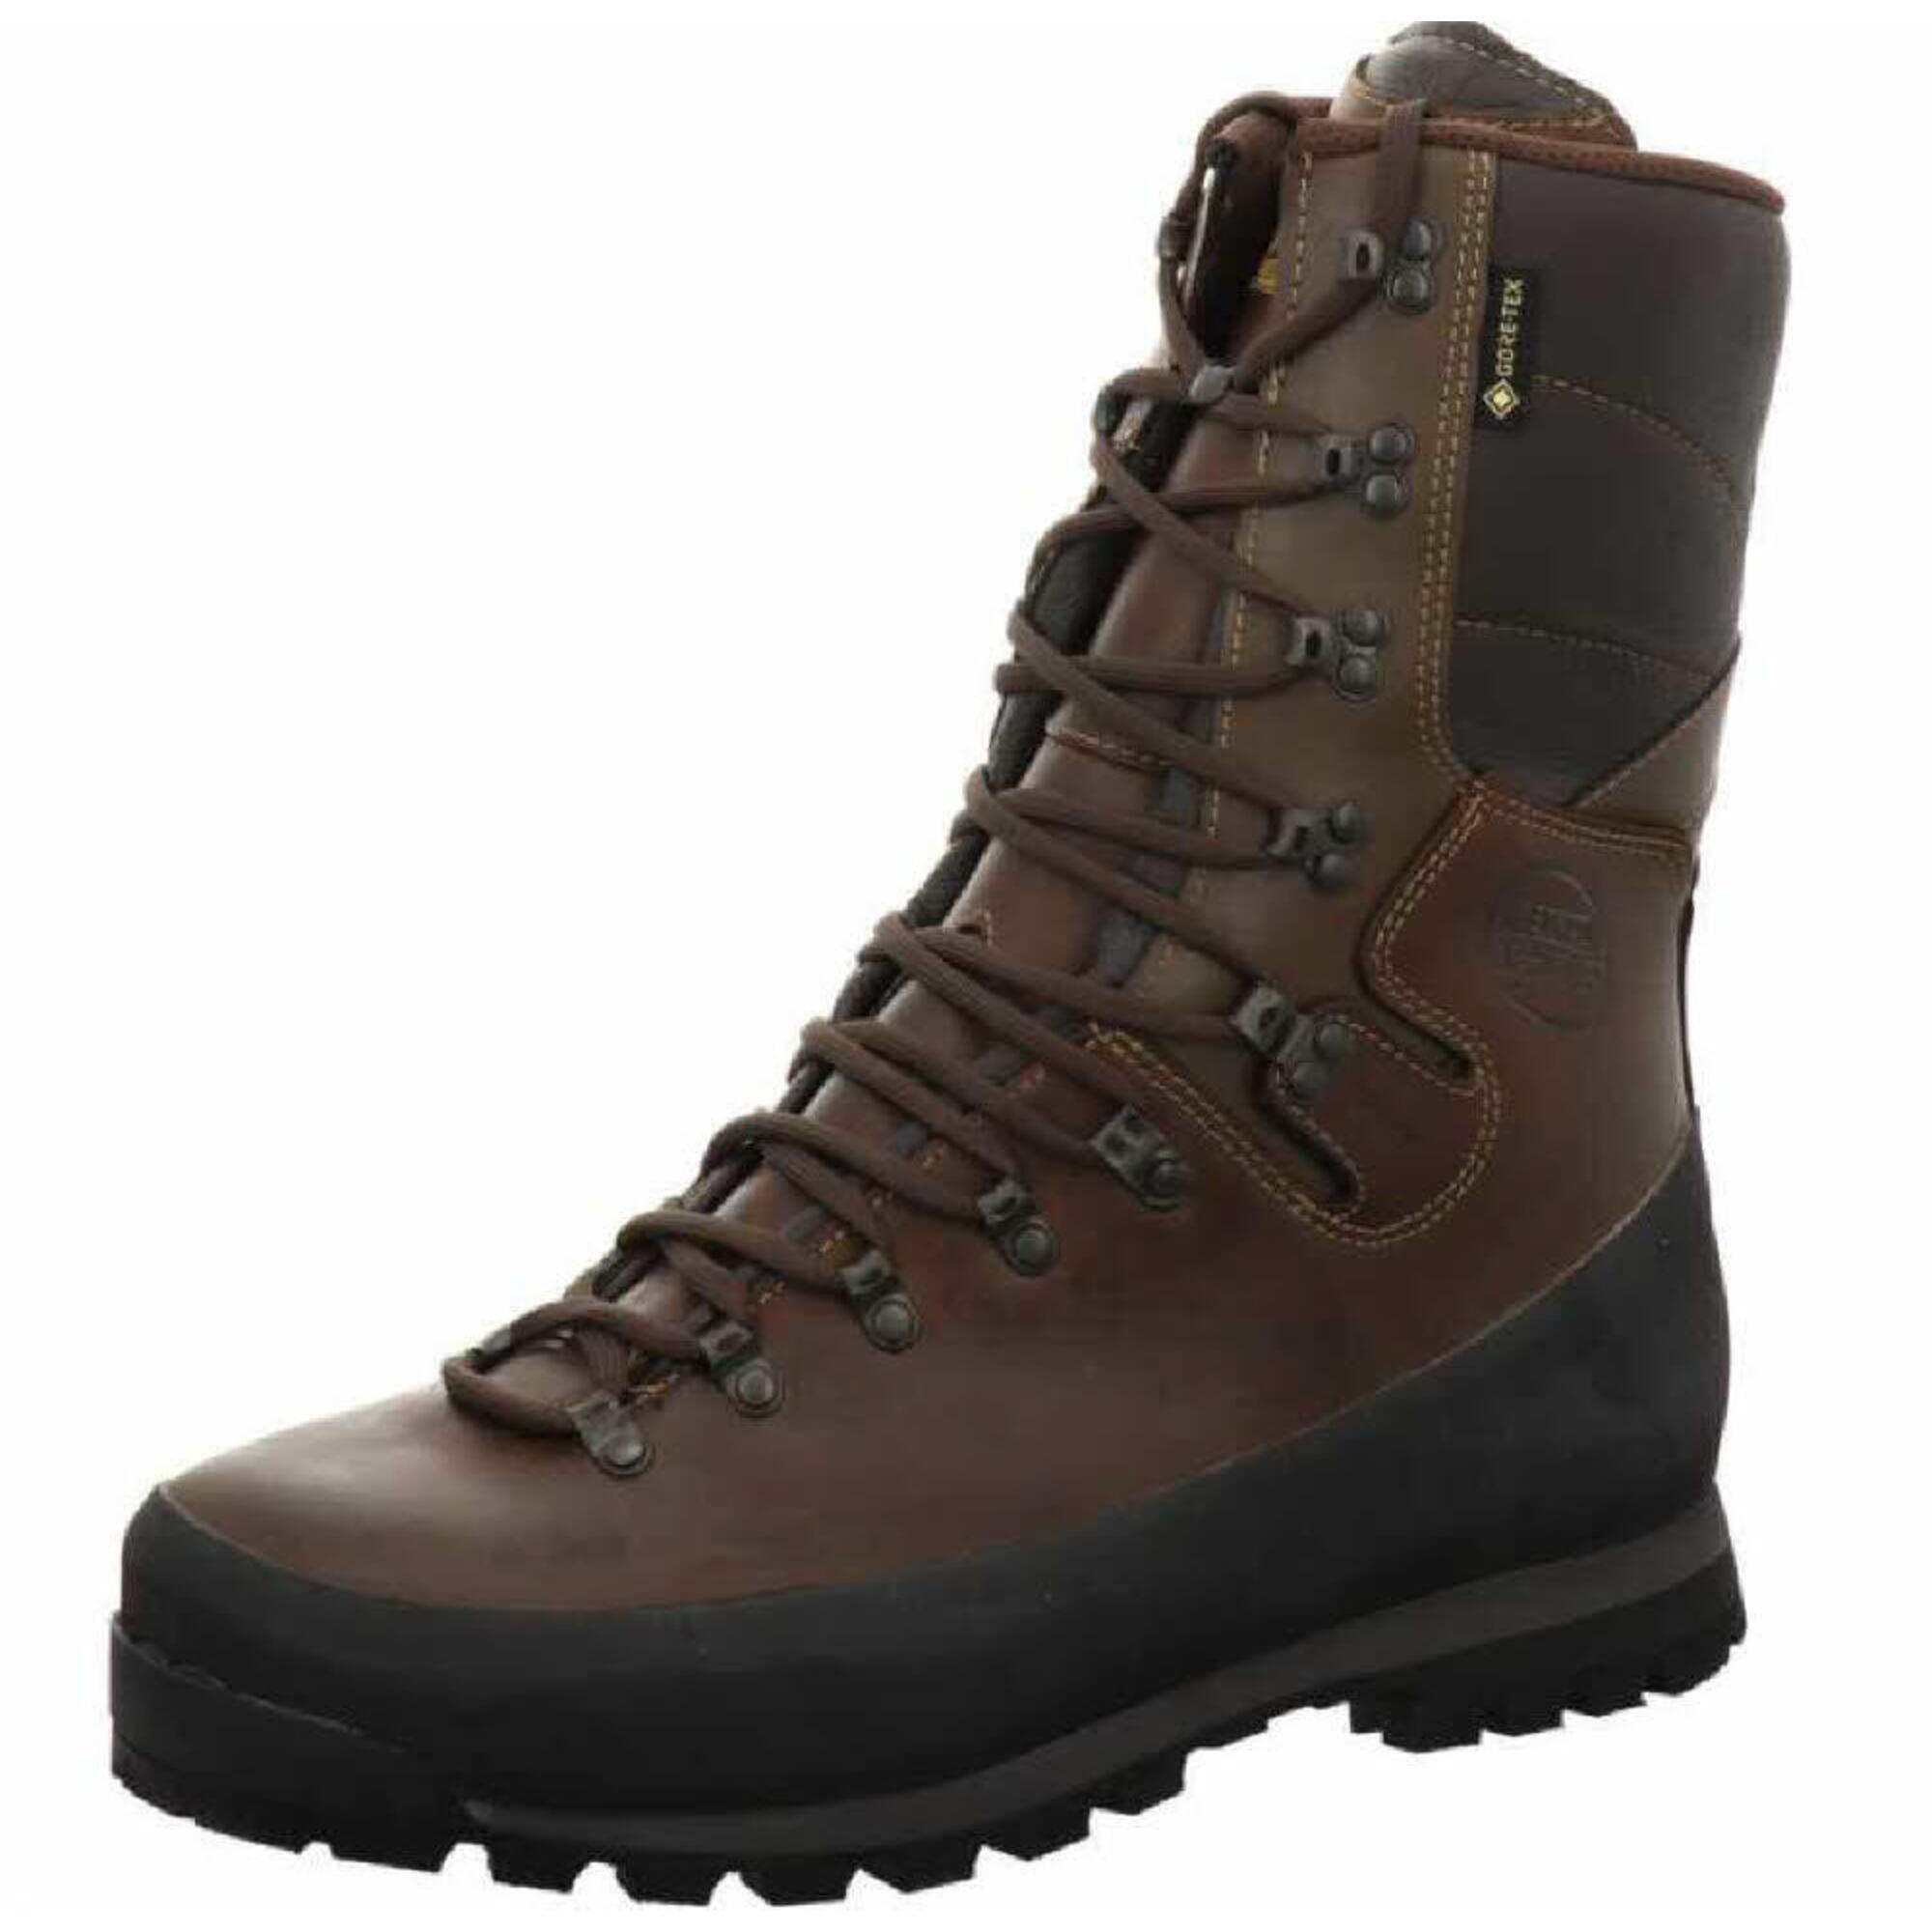 MEINDL Meindl Dovre Extreme GTX - Wide Field Boots UK 8.5